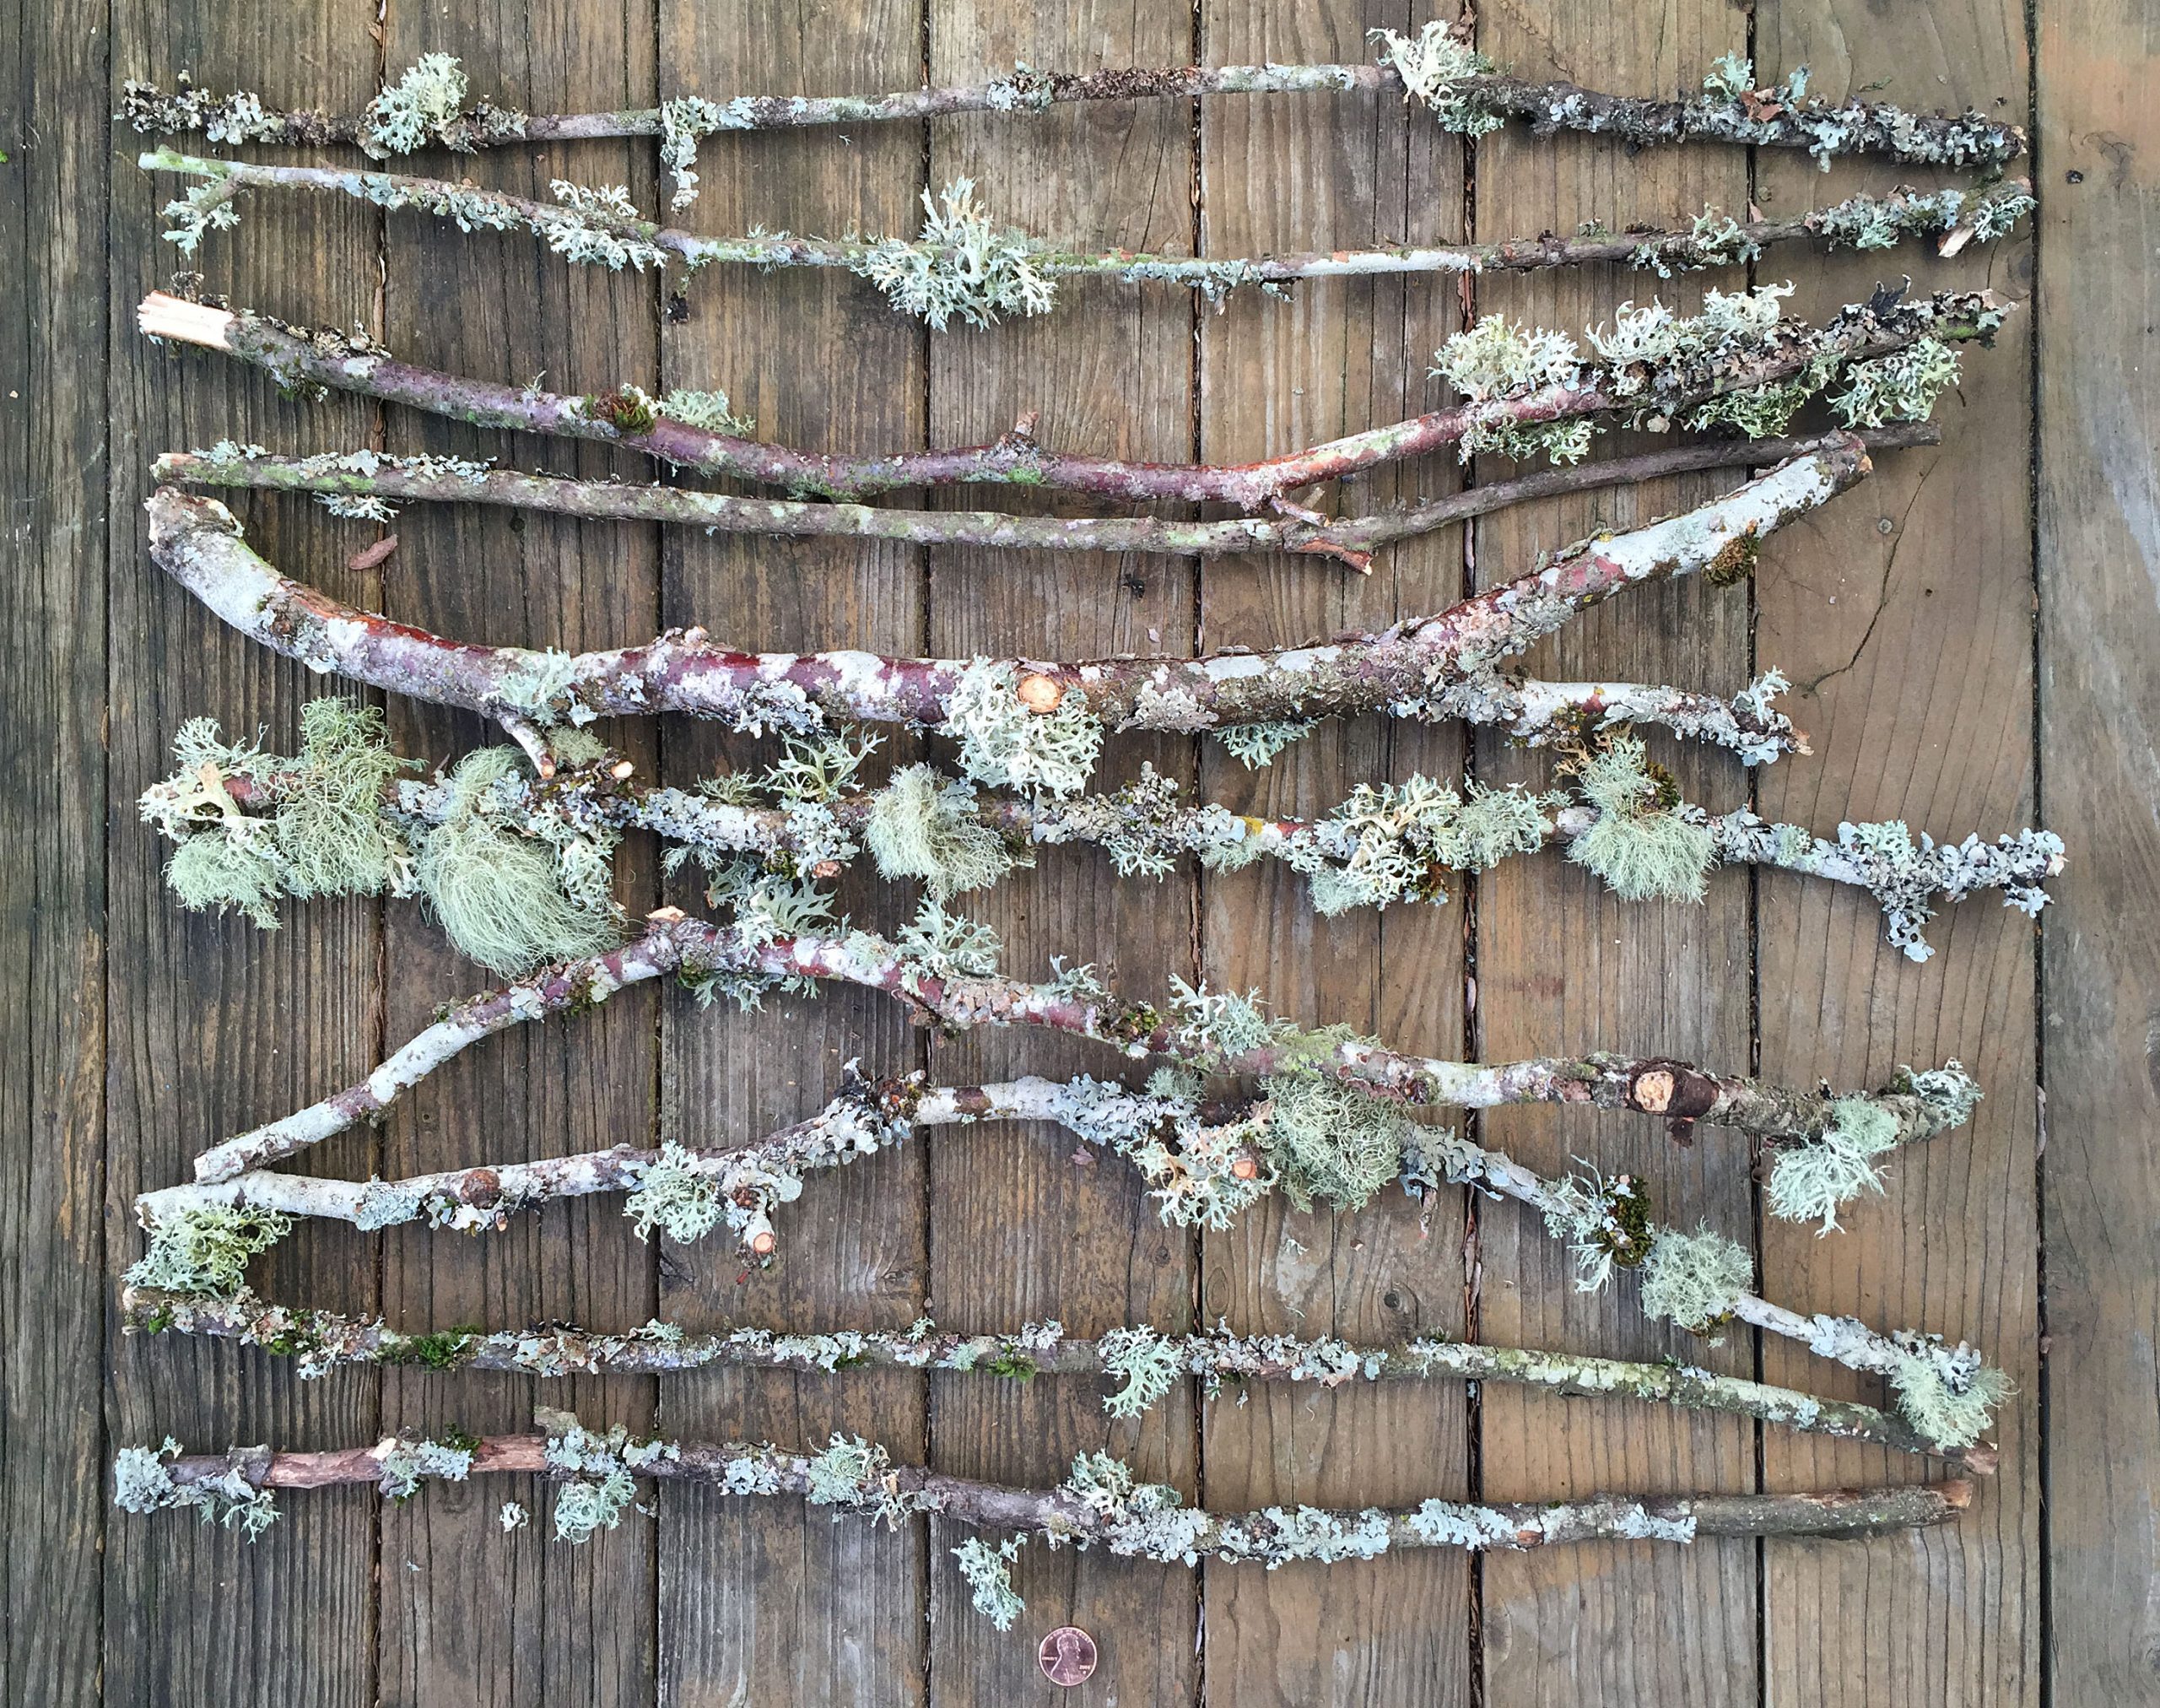 Vibrate each Momentum Lichen and Moss Extra Long Wood Branches for Arts, Crafts, Home Decor,  Critter Habitat | Action Craftworks LLC